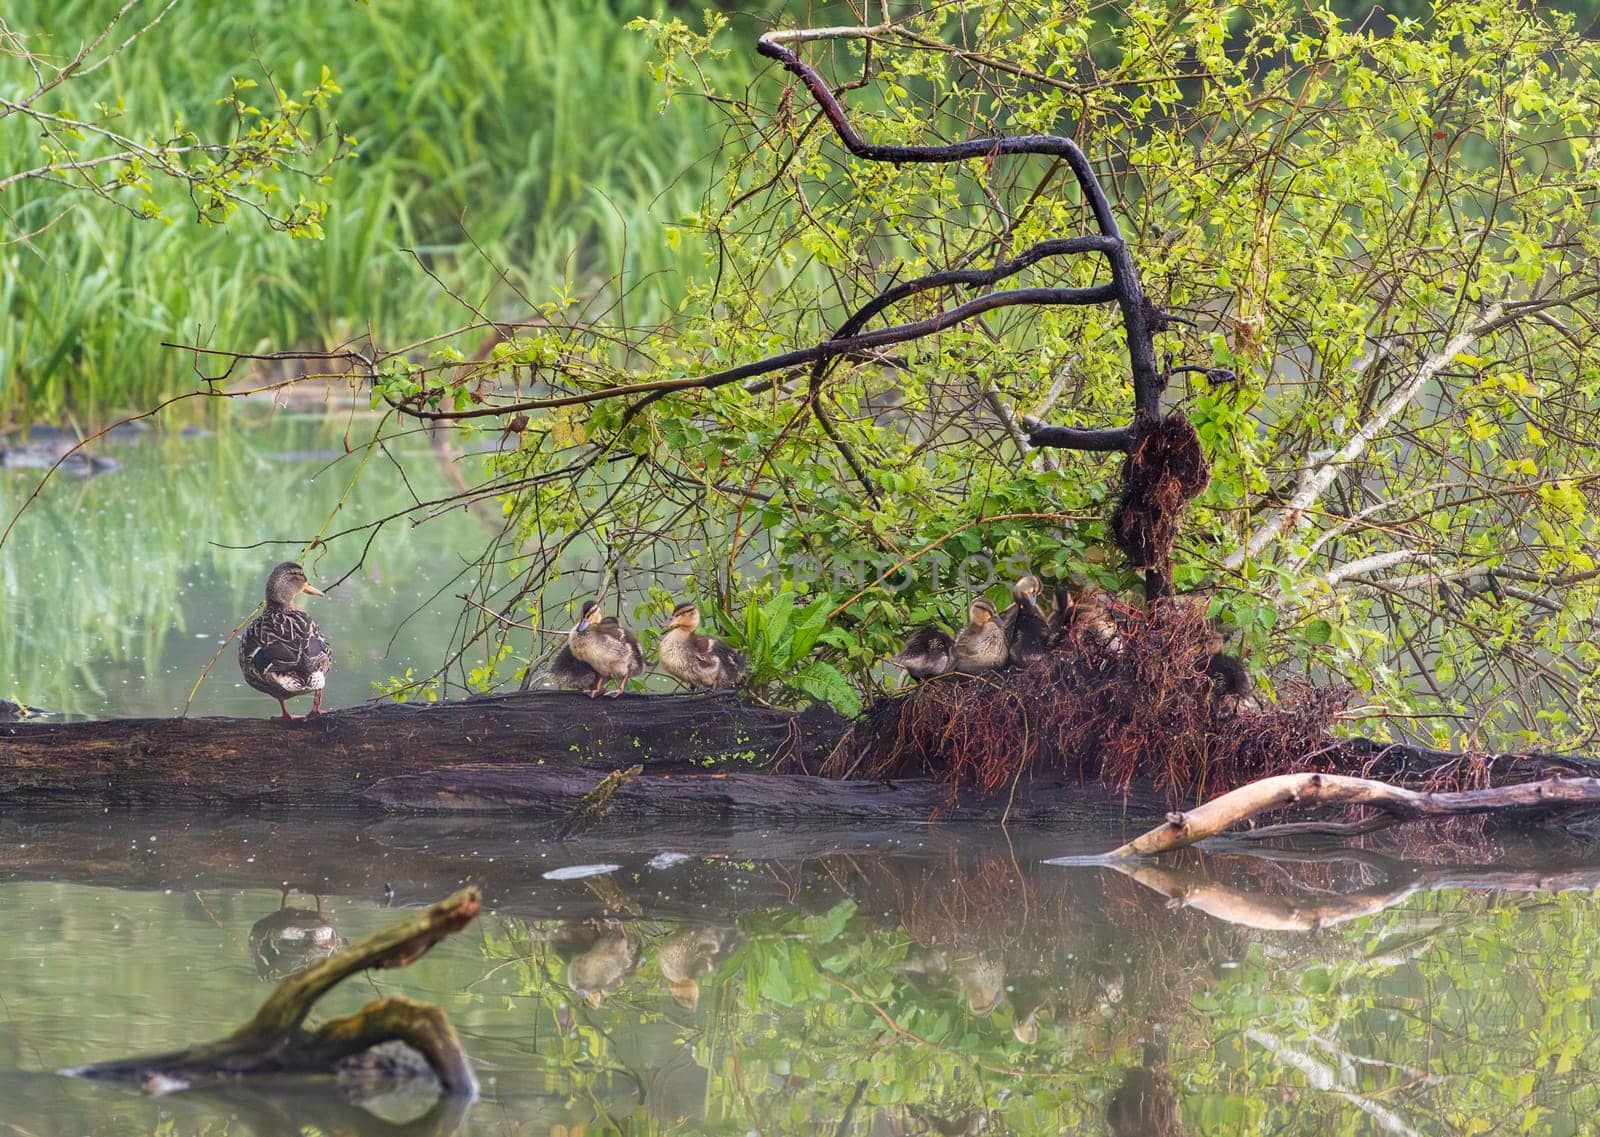 Group of ducklings on log nest in lake at dusk by steheap